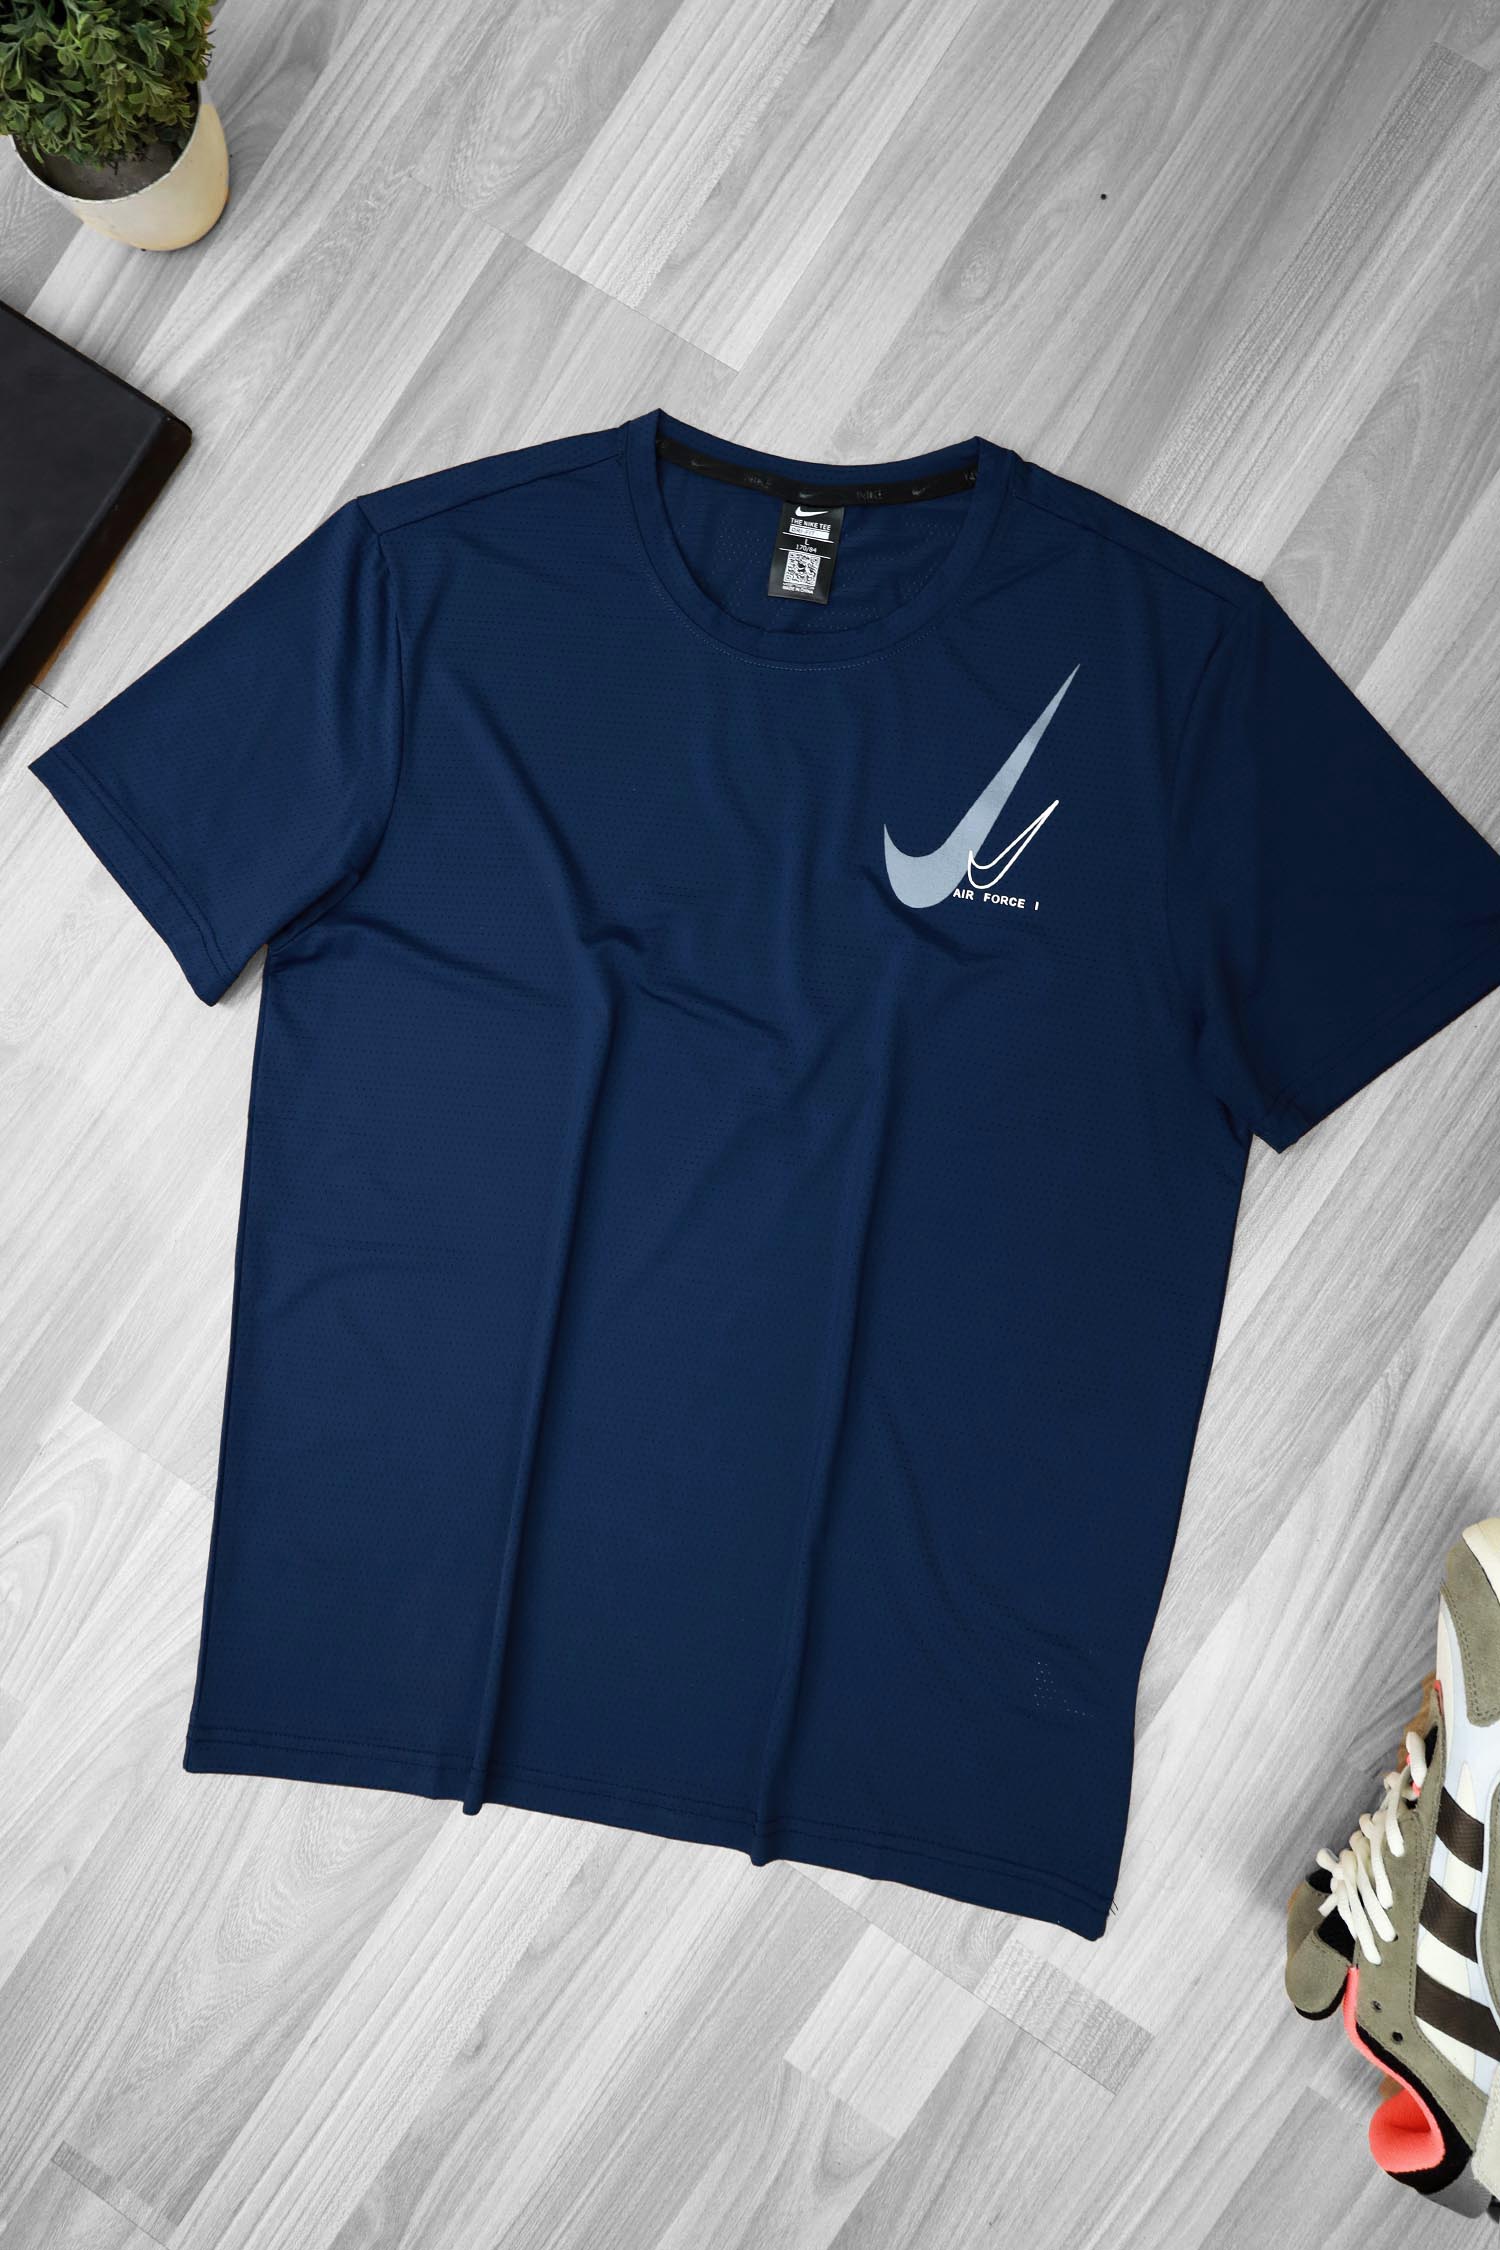 Dry Fit Crew Neck Tee With Nke Aplic Logo In Navy Blue